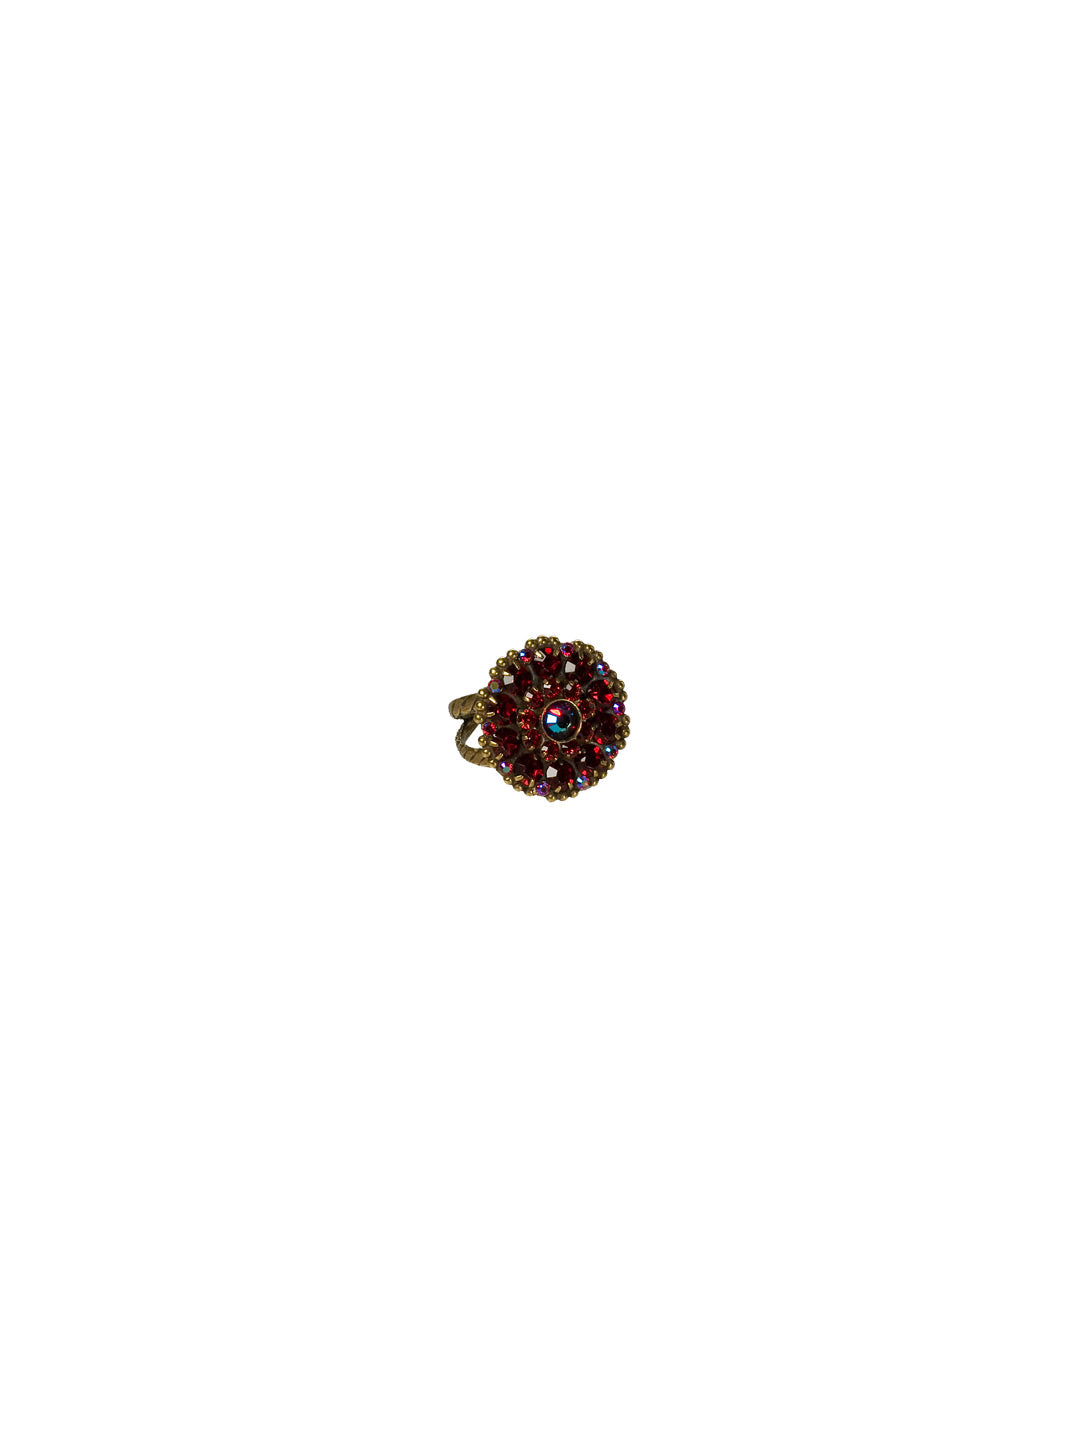 Charming Crystal Bloom Cocktail Ring - RBT78AGCB - Charming clusters of crystals in a subtle floral design make this ring a stand-out From Sorrelli's Cranberry collection in our Antique Gold-tone finish.